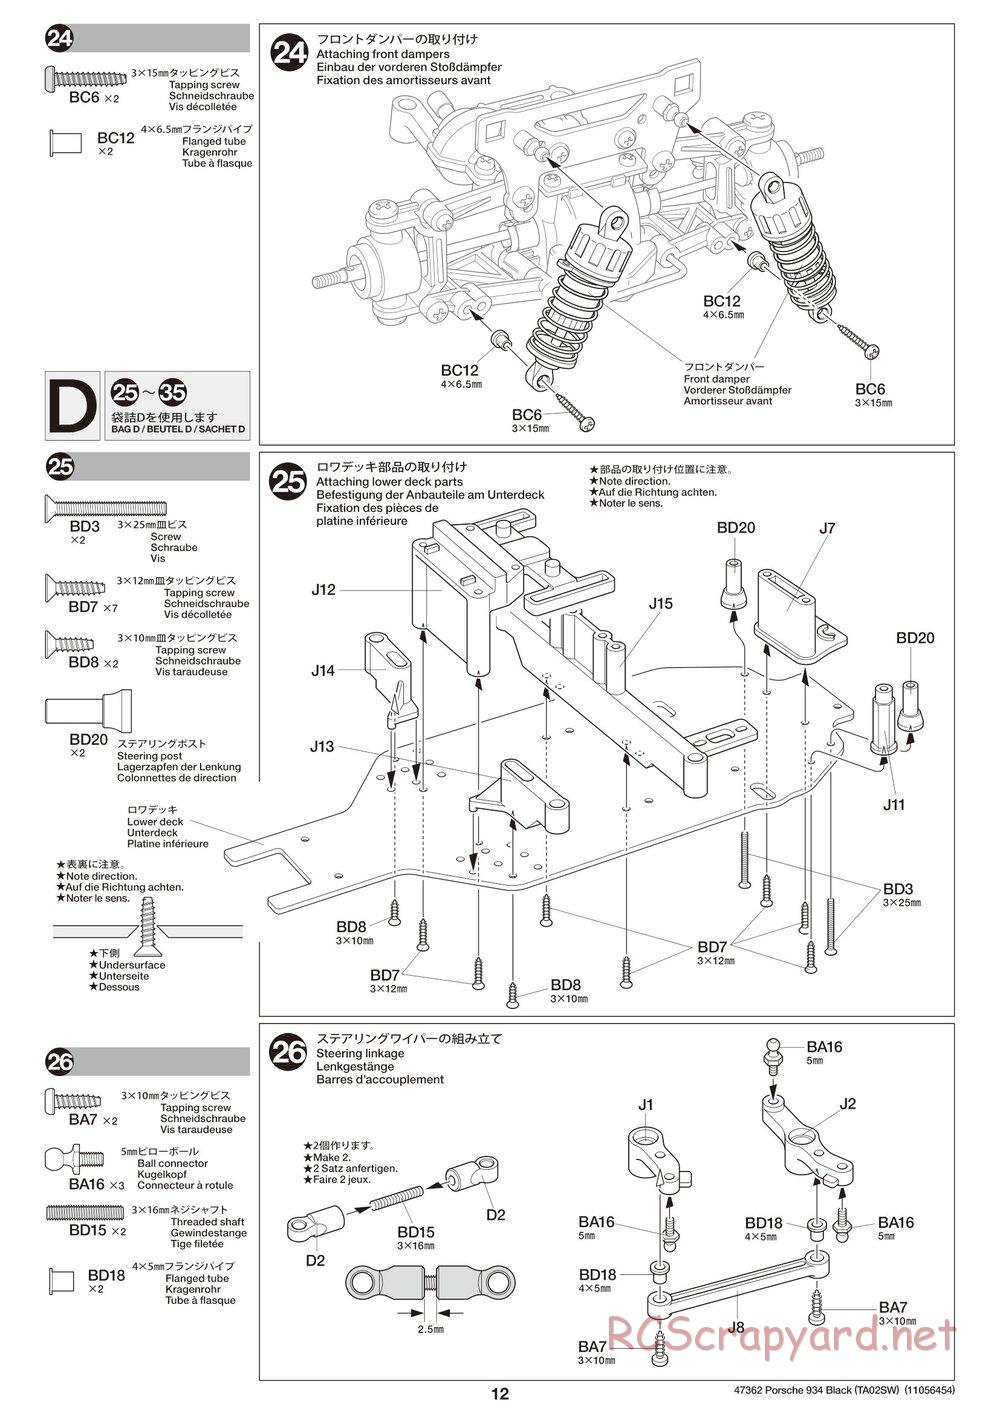 Tamiya - TT-02 White Special Chassis - Manual - Page 12